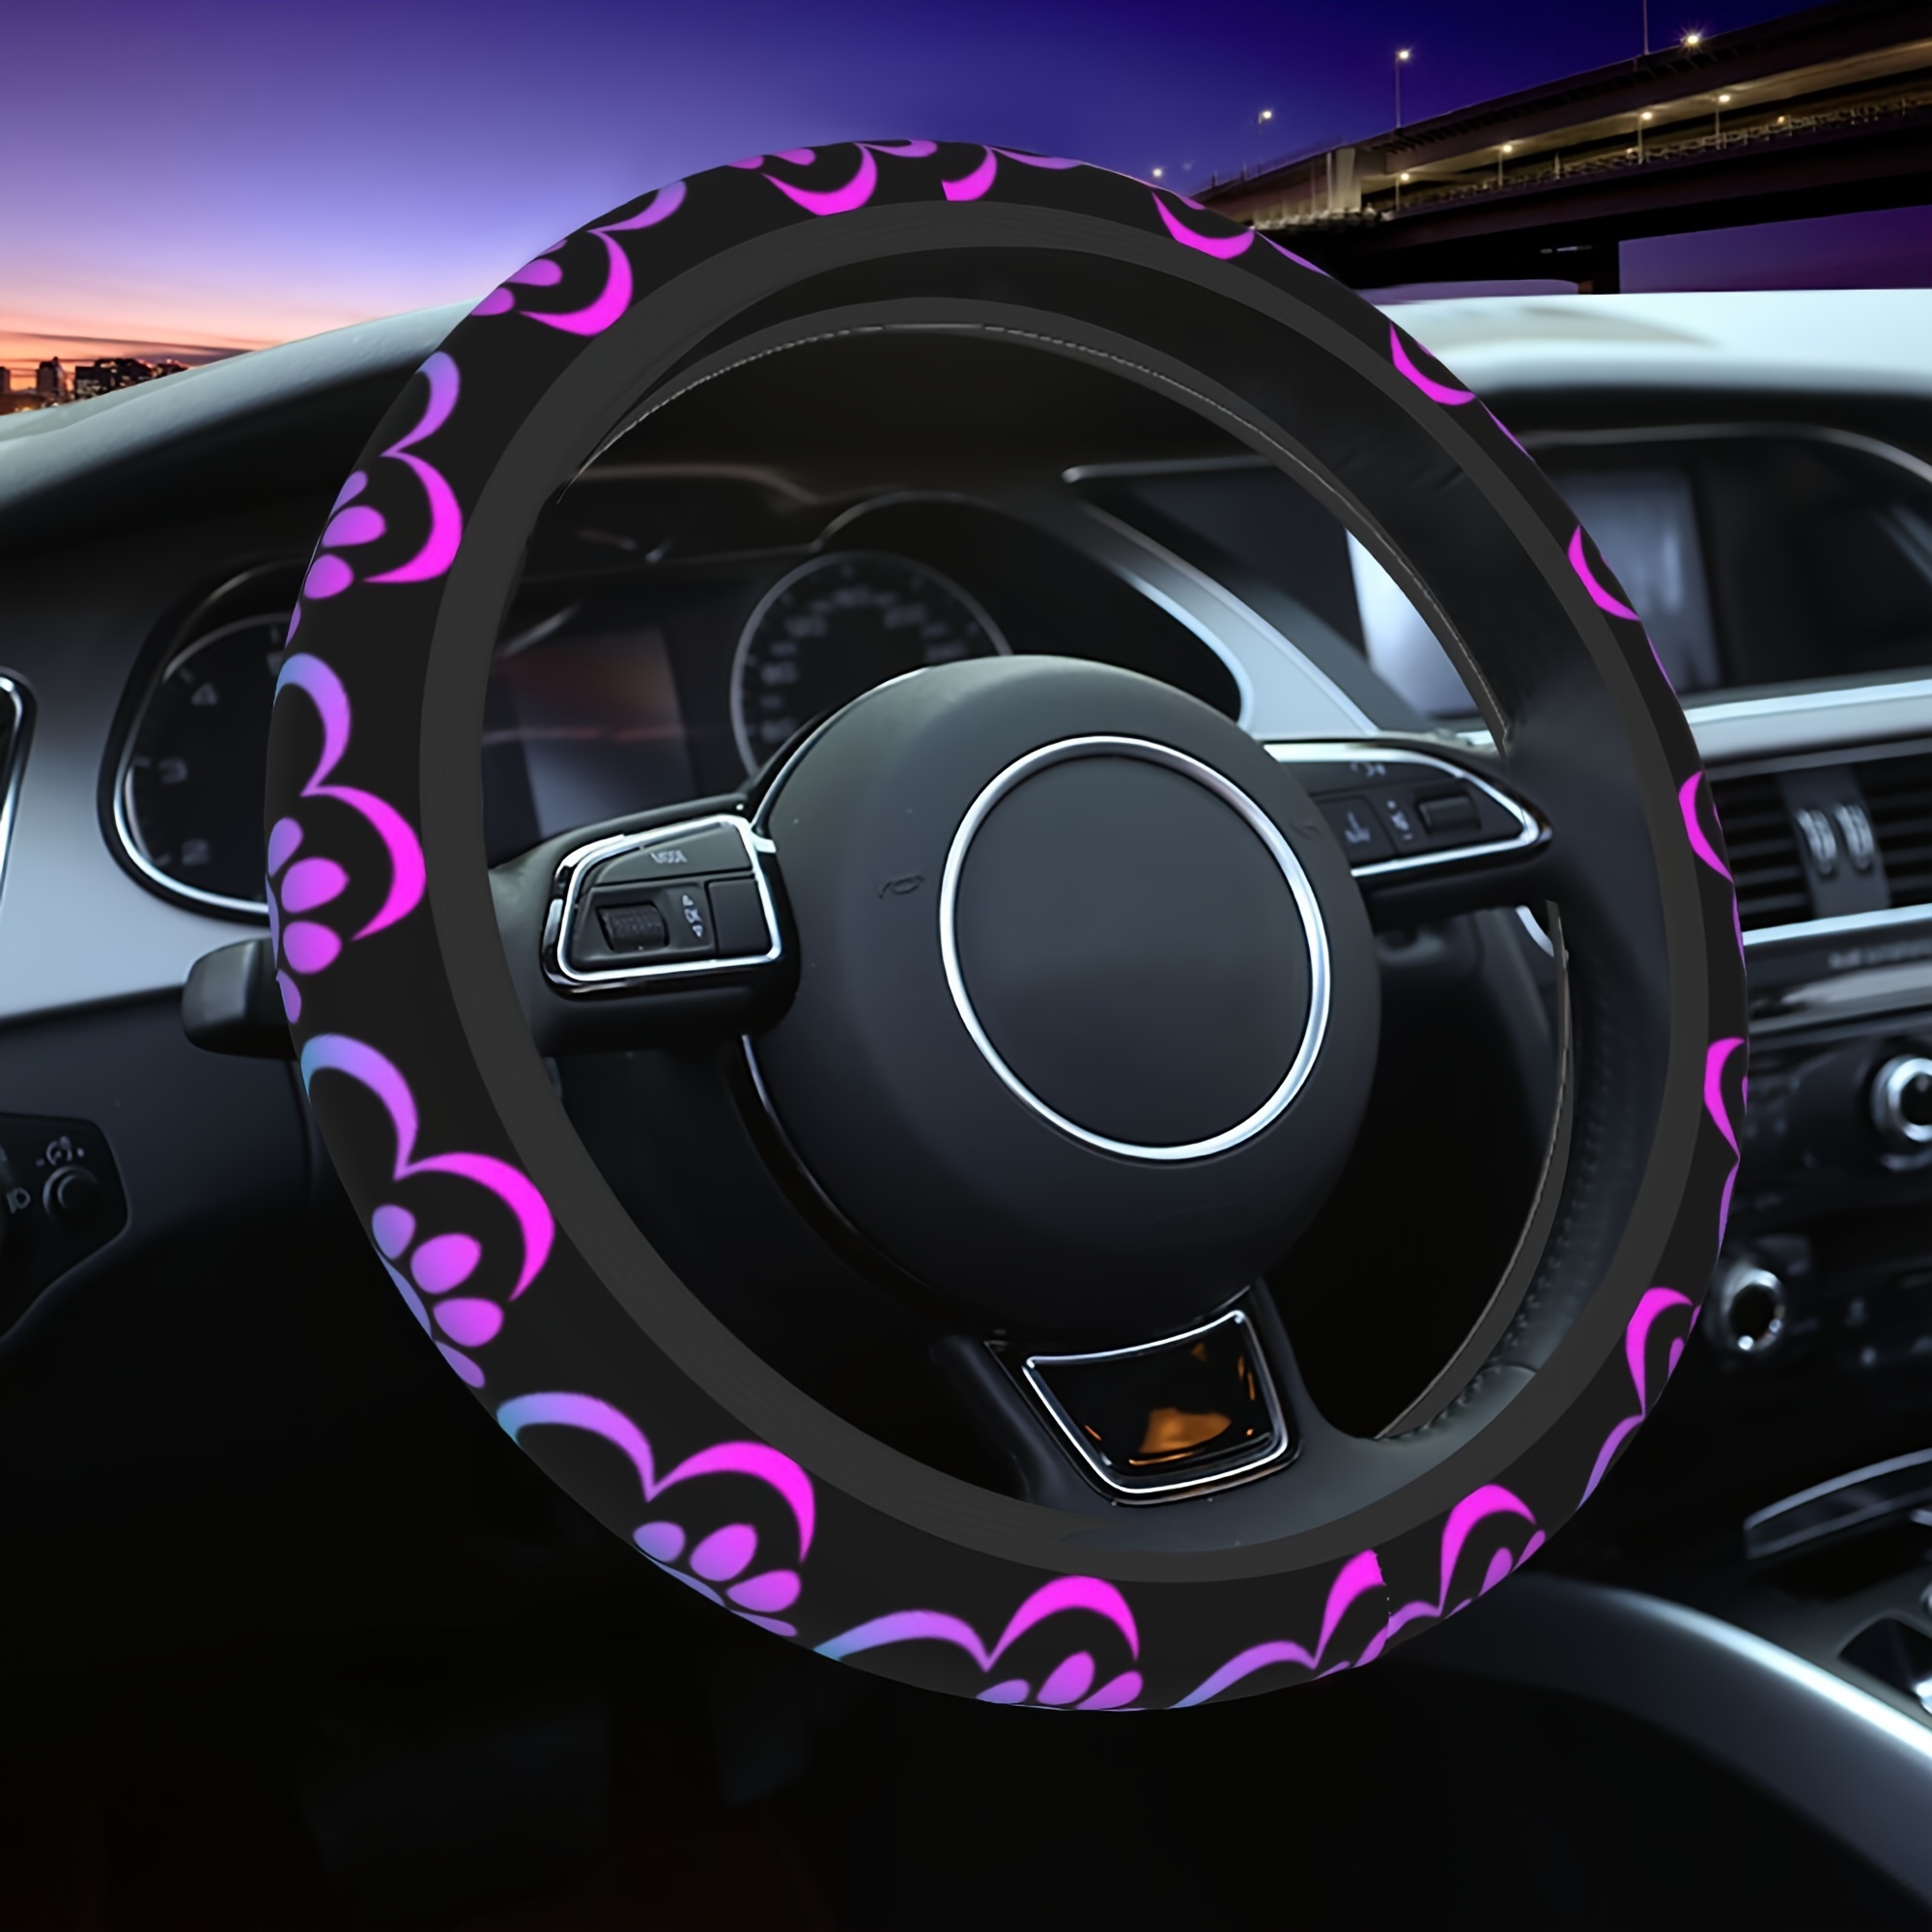 

1pc, Love And Dog Paw Print Printed Car Steering Wheel Cover, Anti-slip Car Steering Wheel Protective Cover, Universal Car Model 15-inch Car Interior Accessories, Suitable For Cars, Suvs, Trucks, Etc